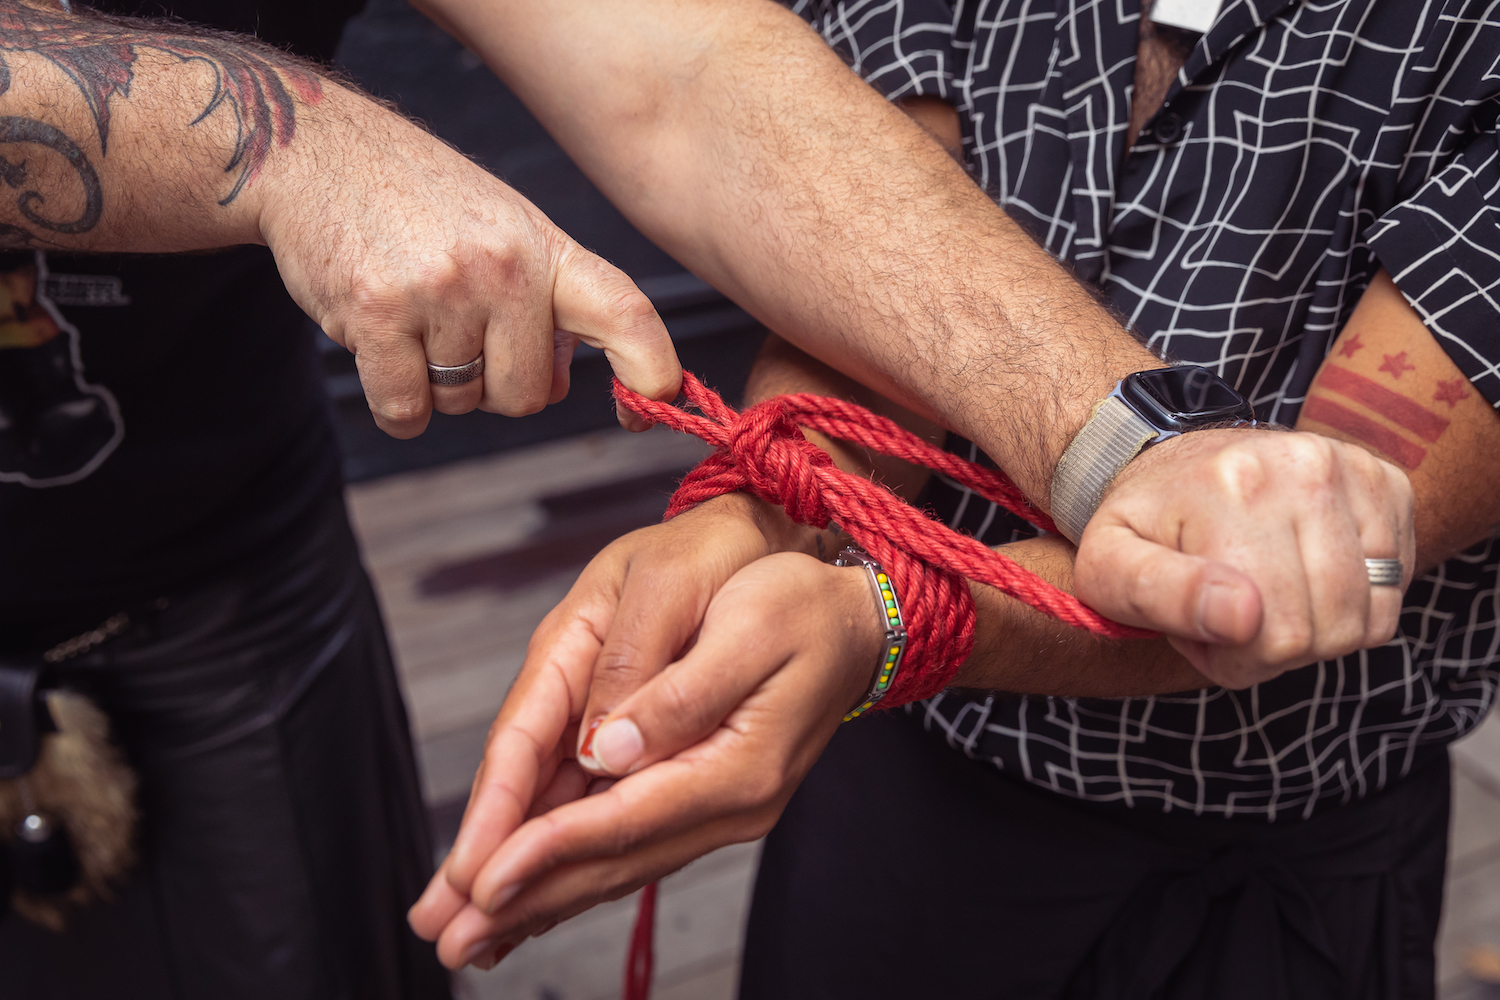 A man in the act of tying a rope in a knot around the wrists of another man.